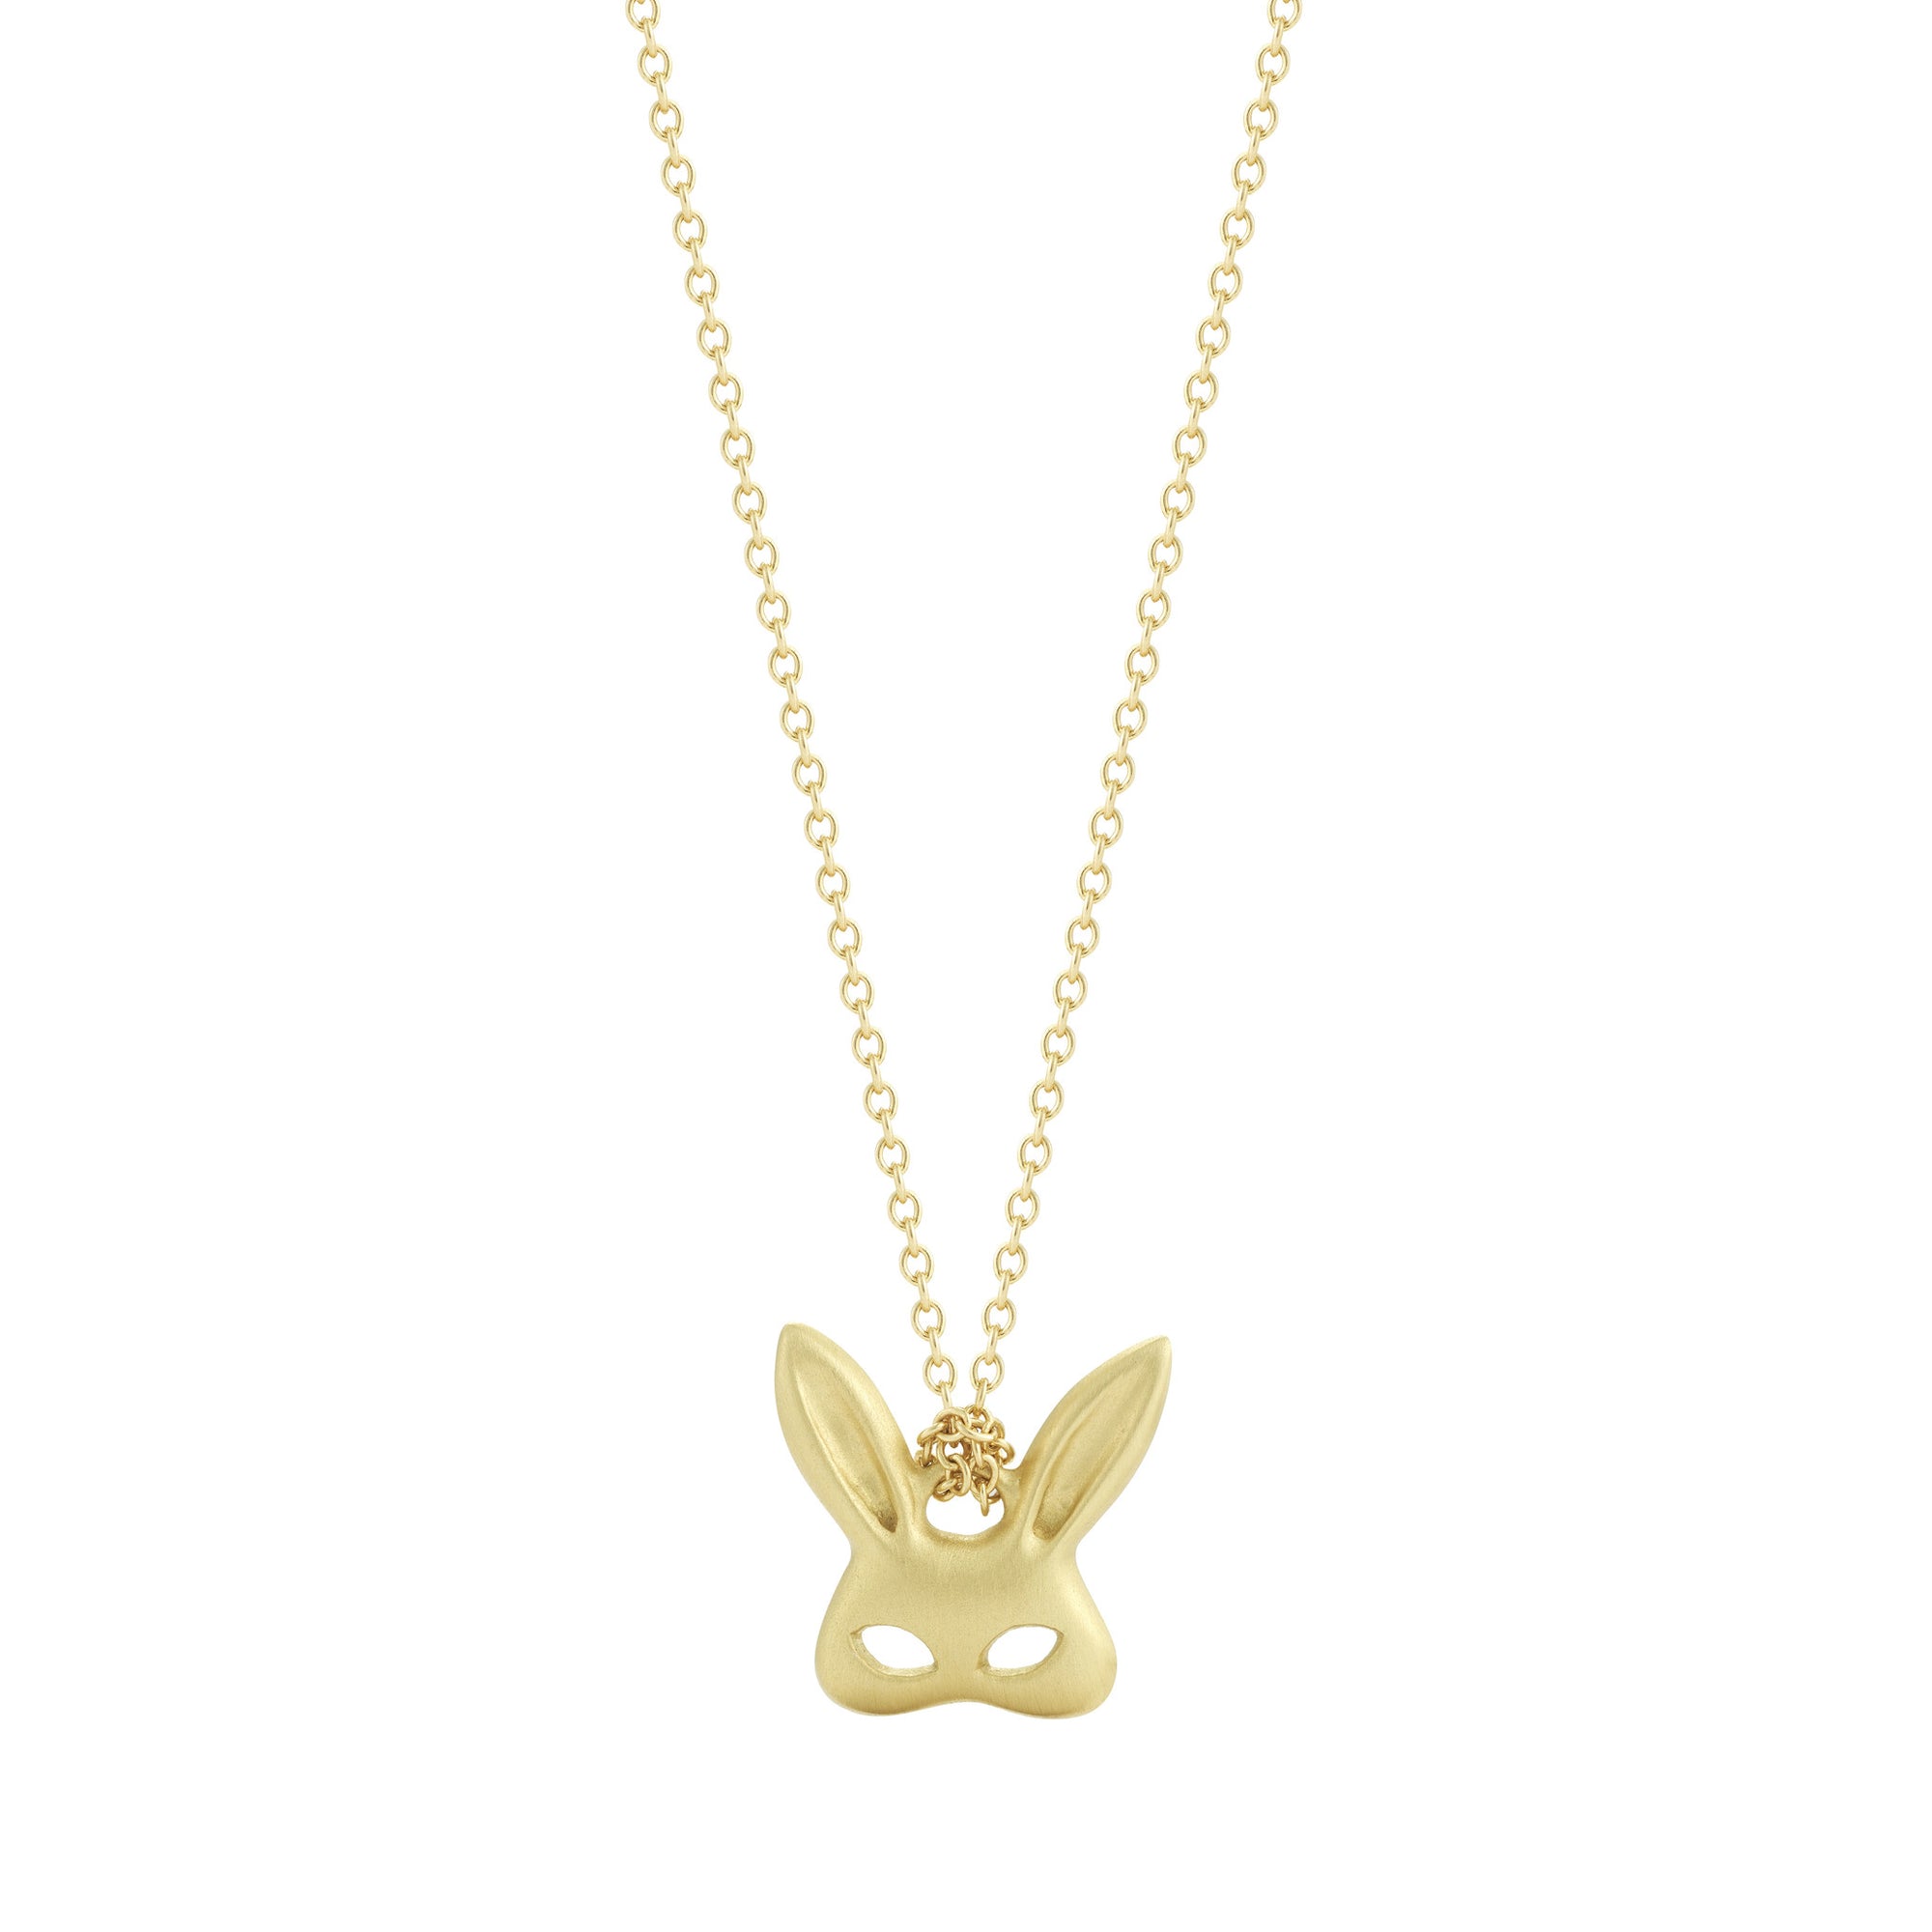 everyday rabbit bunny costume mask pendant on delicate chain in 18k yellow gold by finn by candice pool neistat